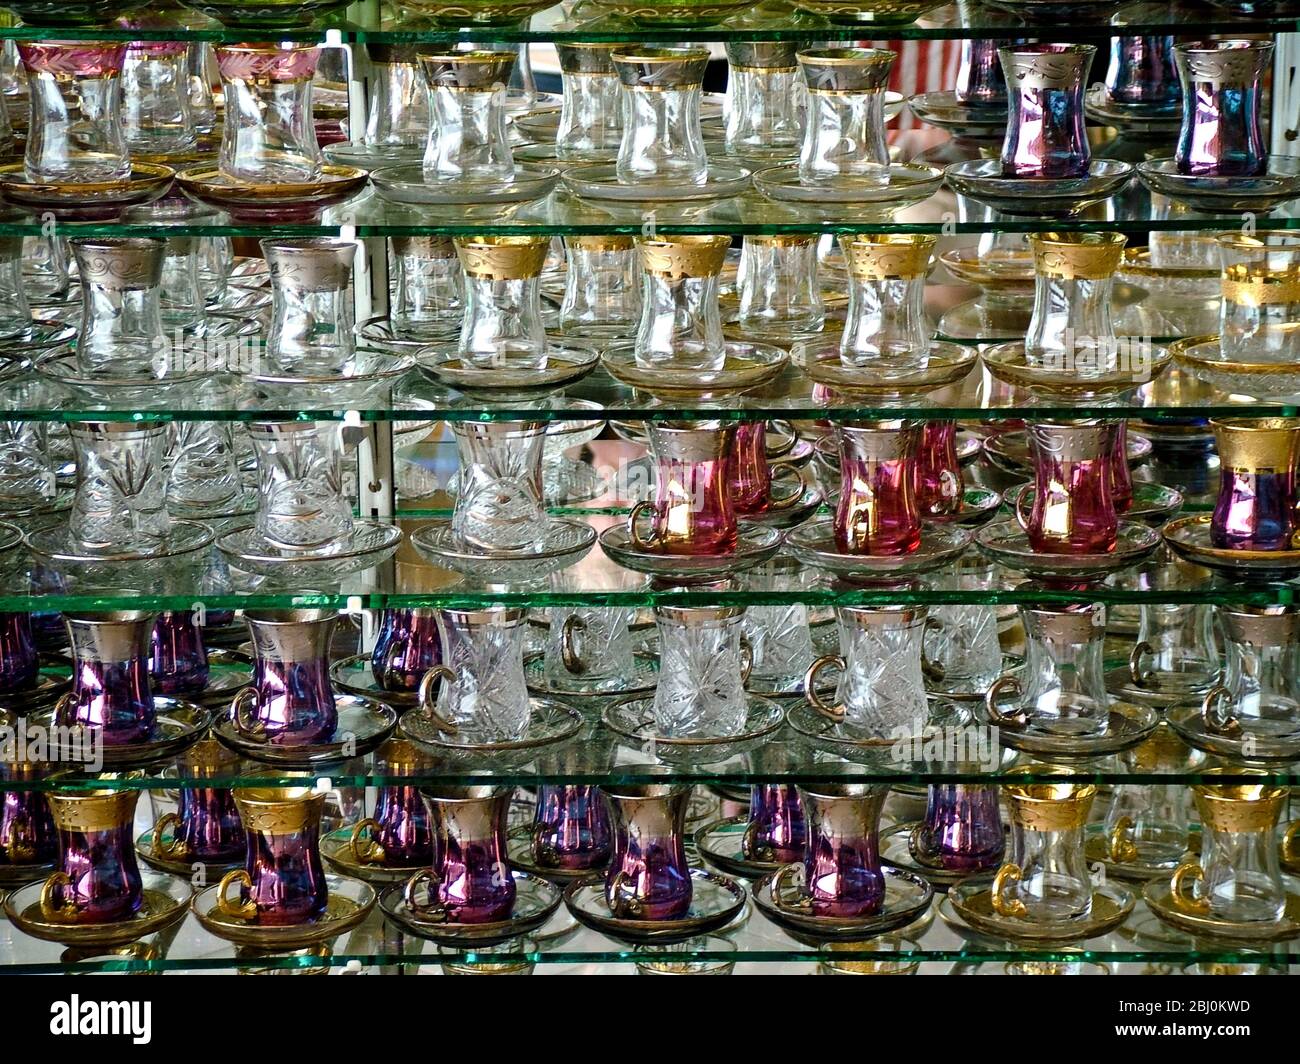 Rows of tea glasses stacked on glass shelves in store on waterfront in Dalyan, southern Turkey - Stock Photo